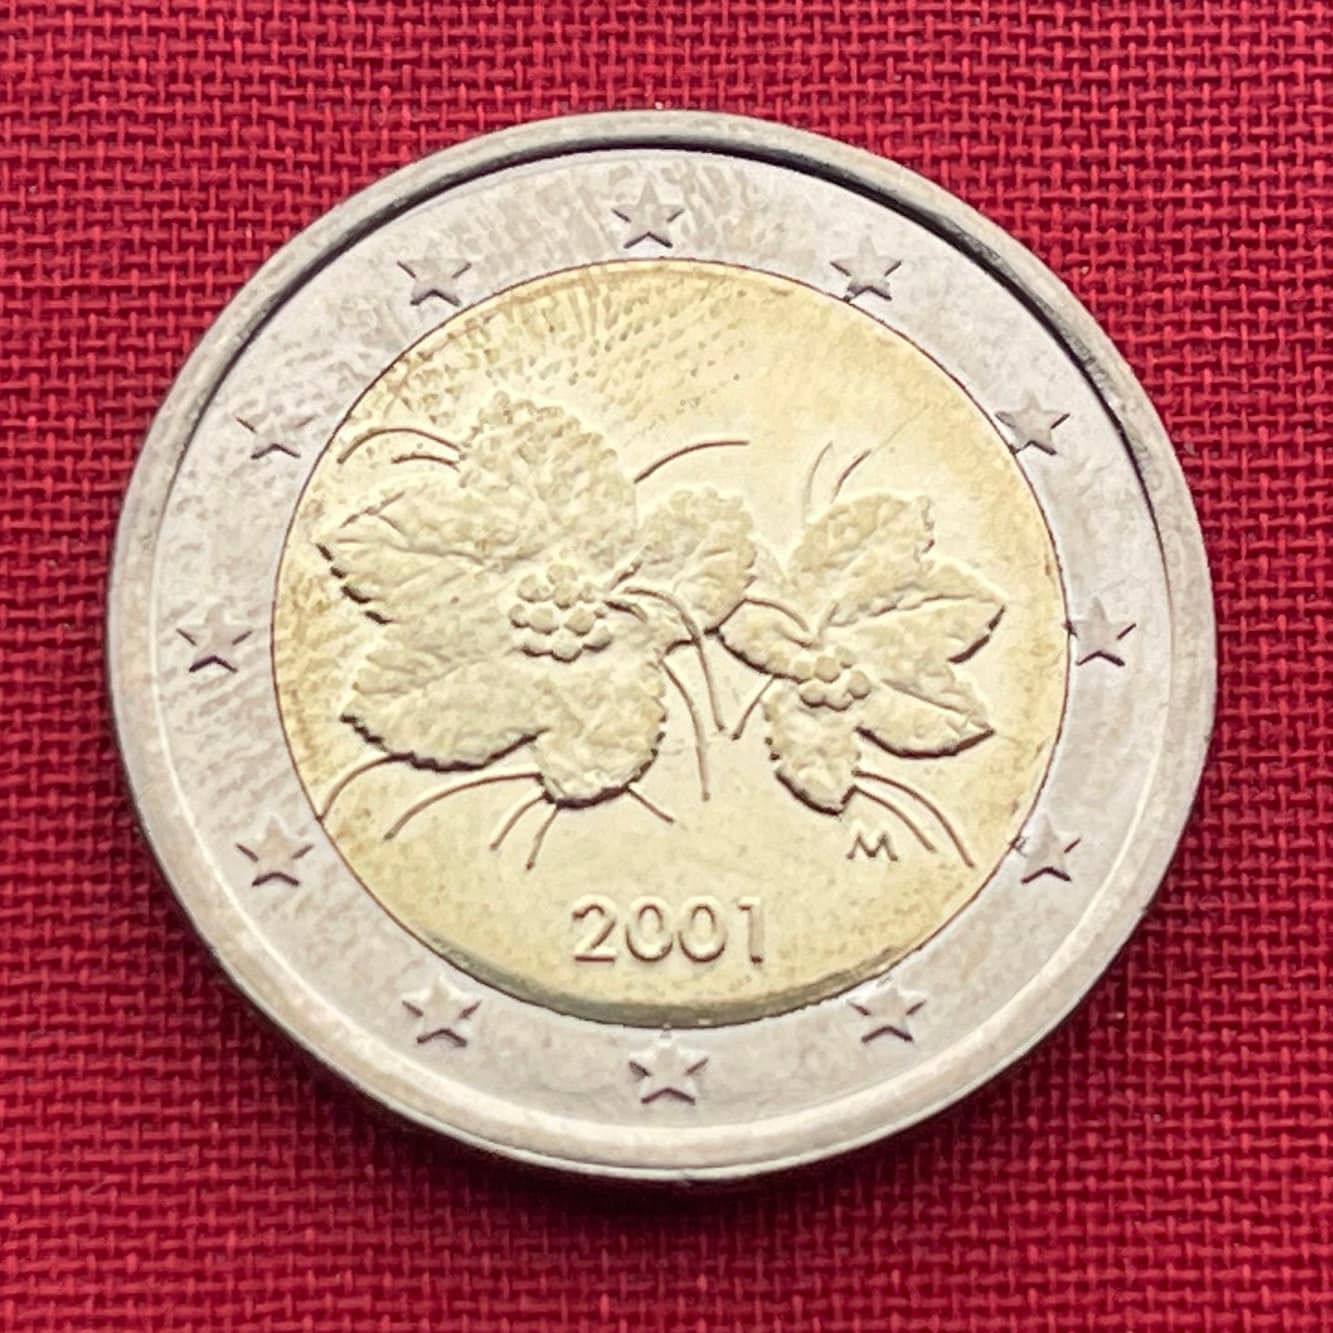 Cloudberry Flowers & Berries 2 Euros Finland Authentic Coin Money for Jewelry and Craft Making (Bimetallic)